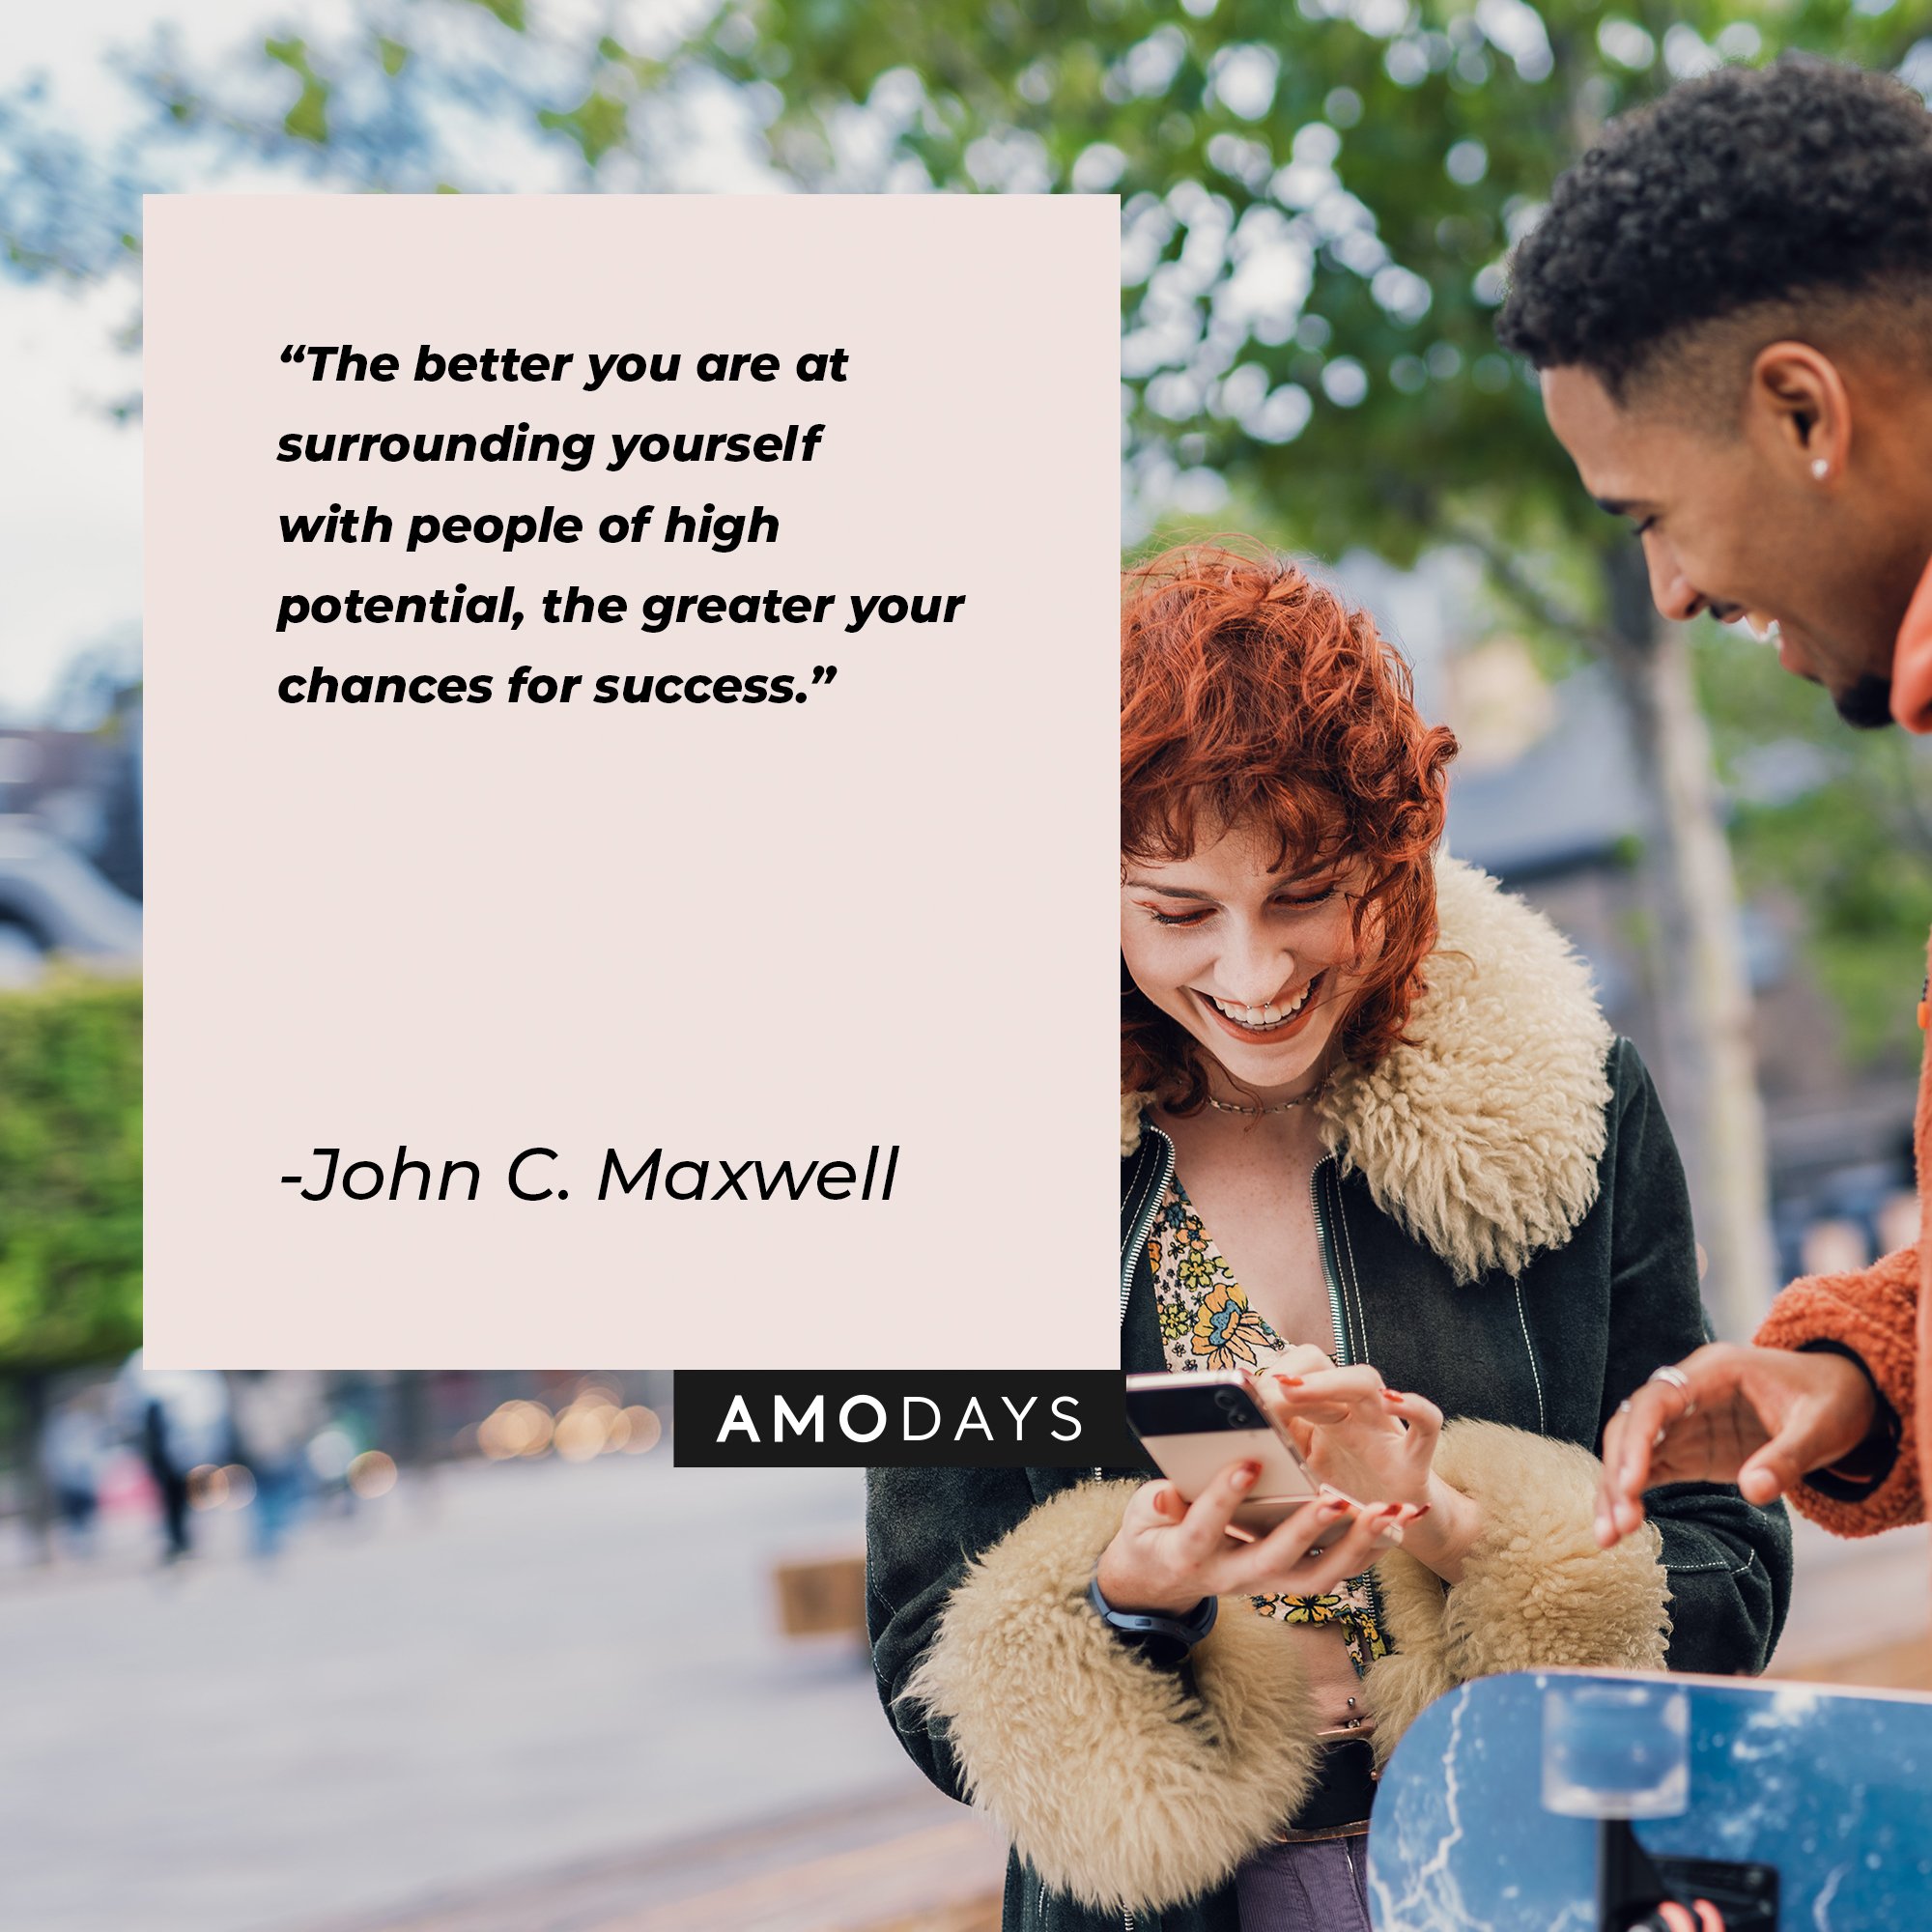 John C. Maxwell’s quote: “The better you are at surrounding yourself with people of high potential, the greater your chances for success.” | Image: AmoDays